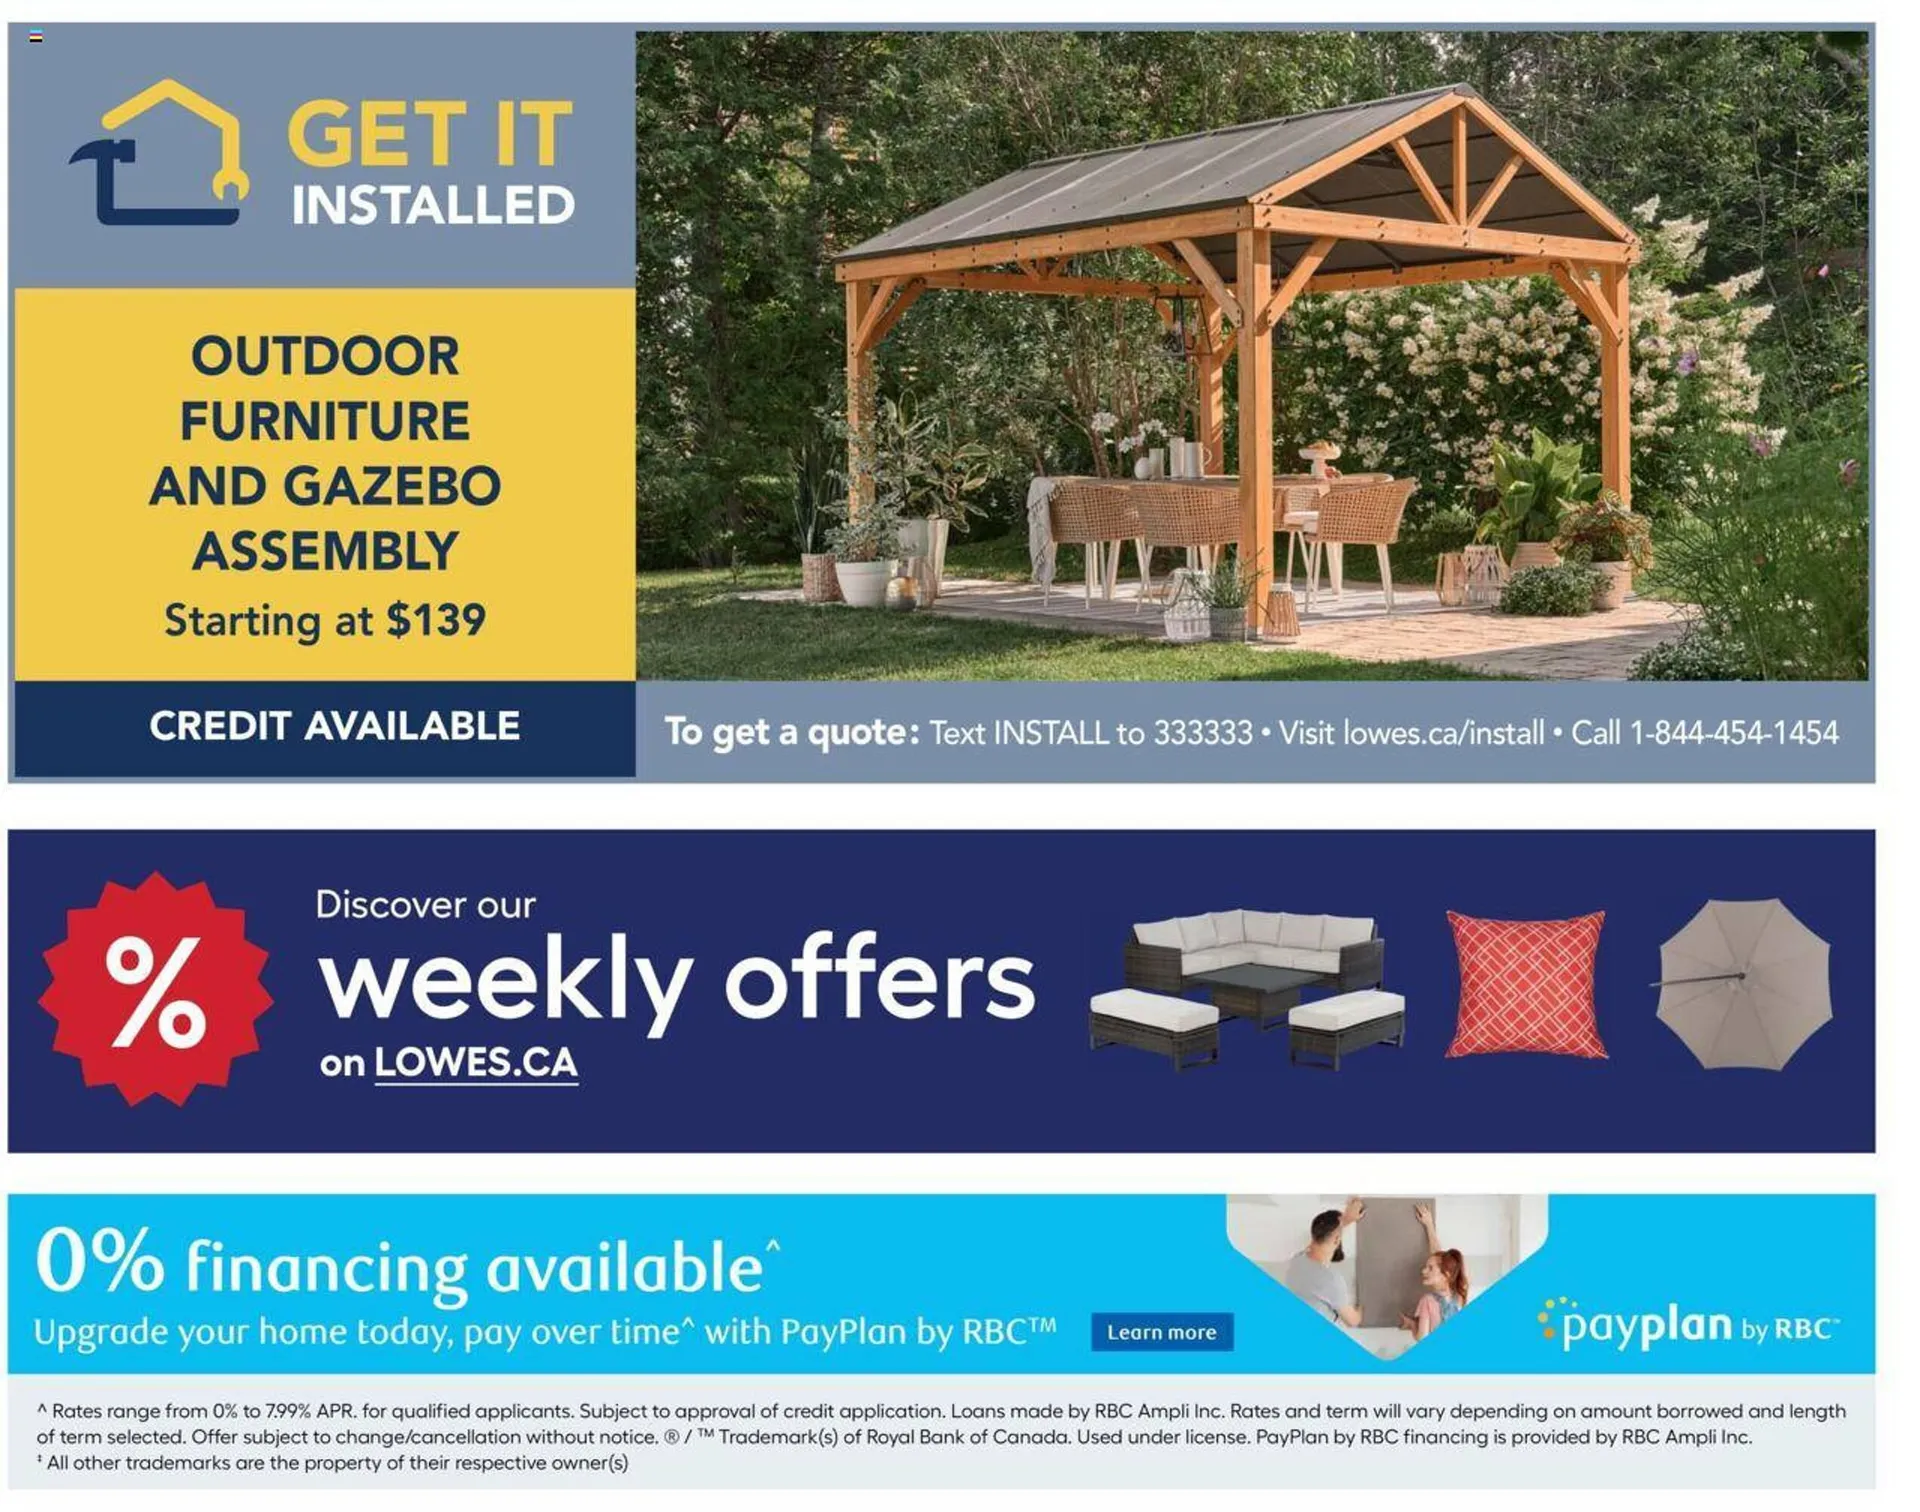 Lowes flyer - 17